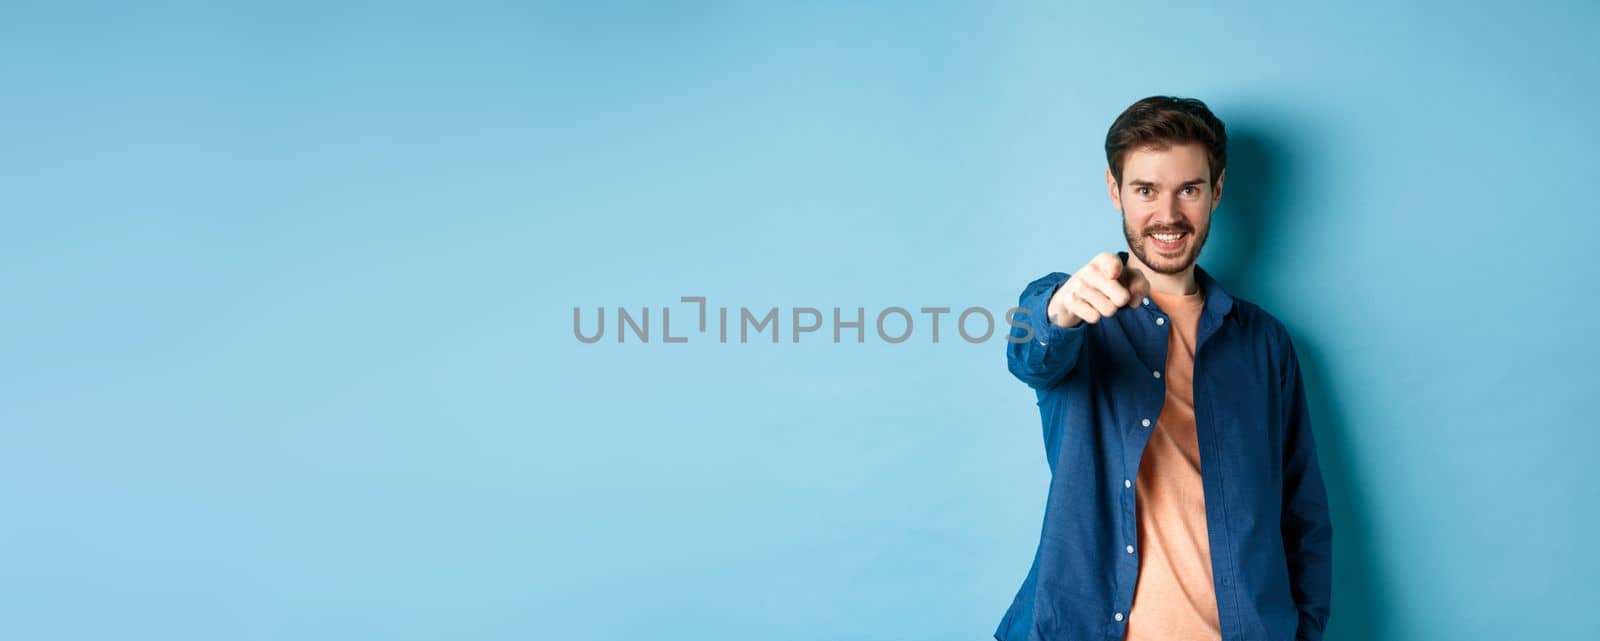 Confident smiling guy choosing or inviting you, pointing finger at camera decisive, standing on blue background.